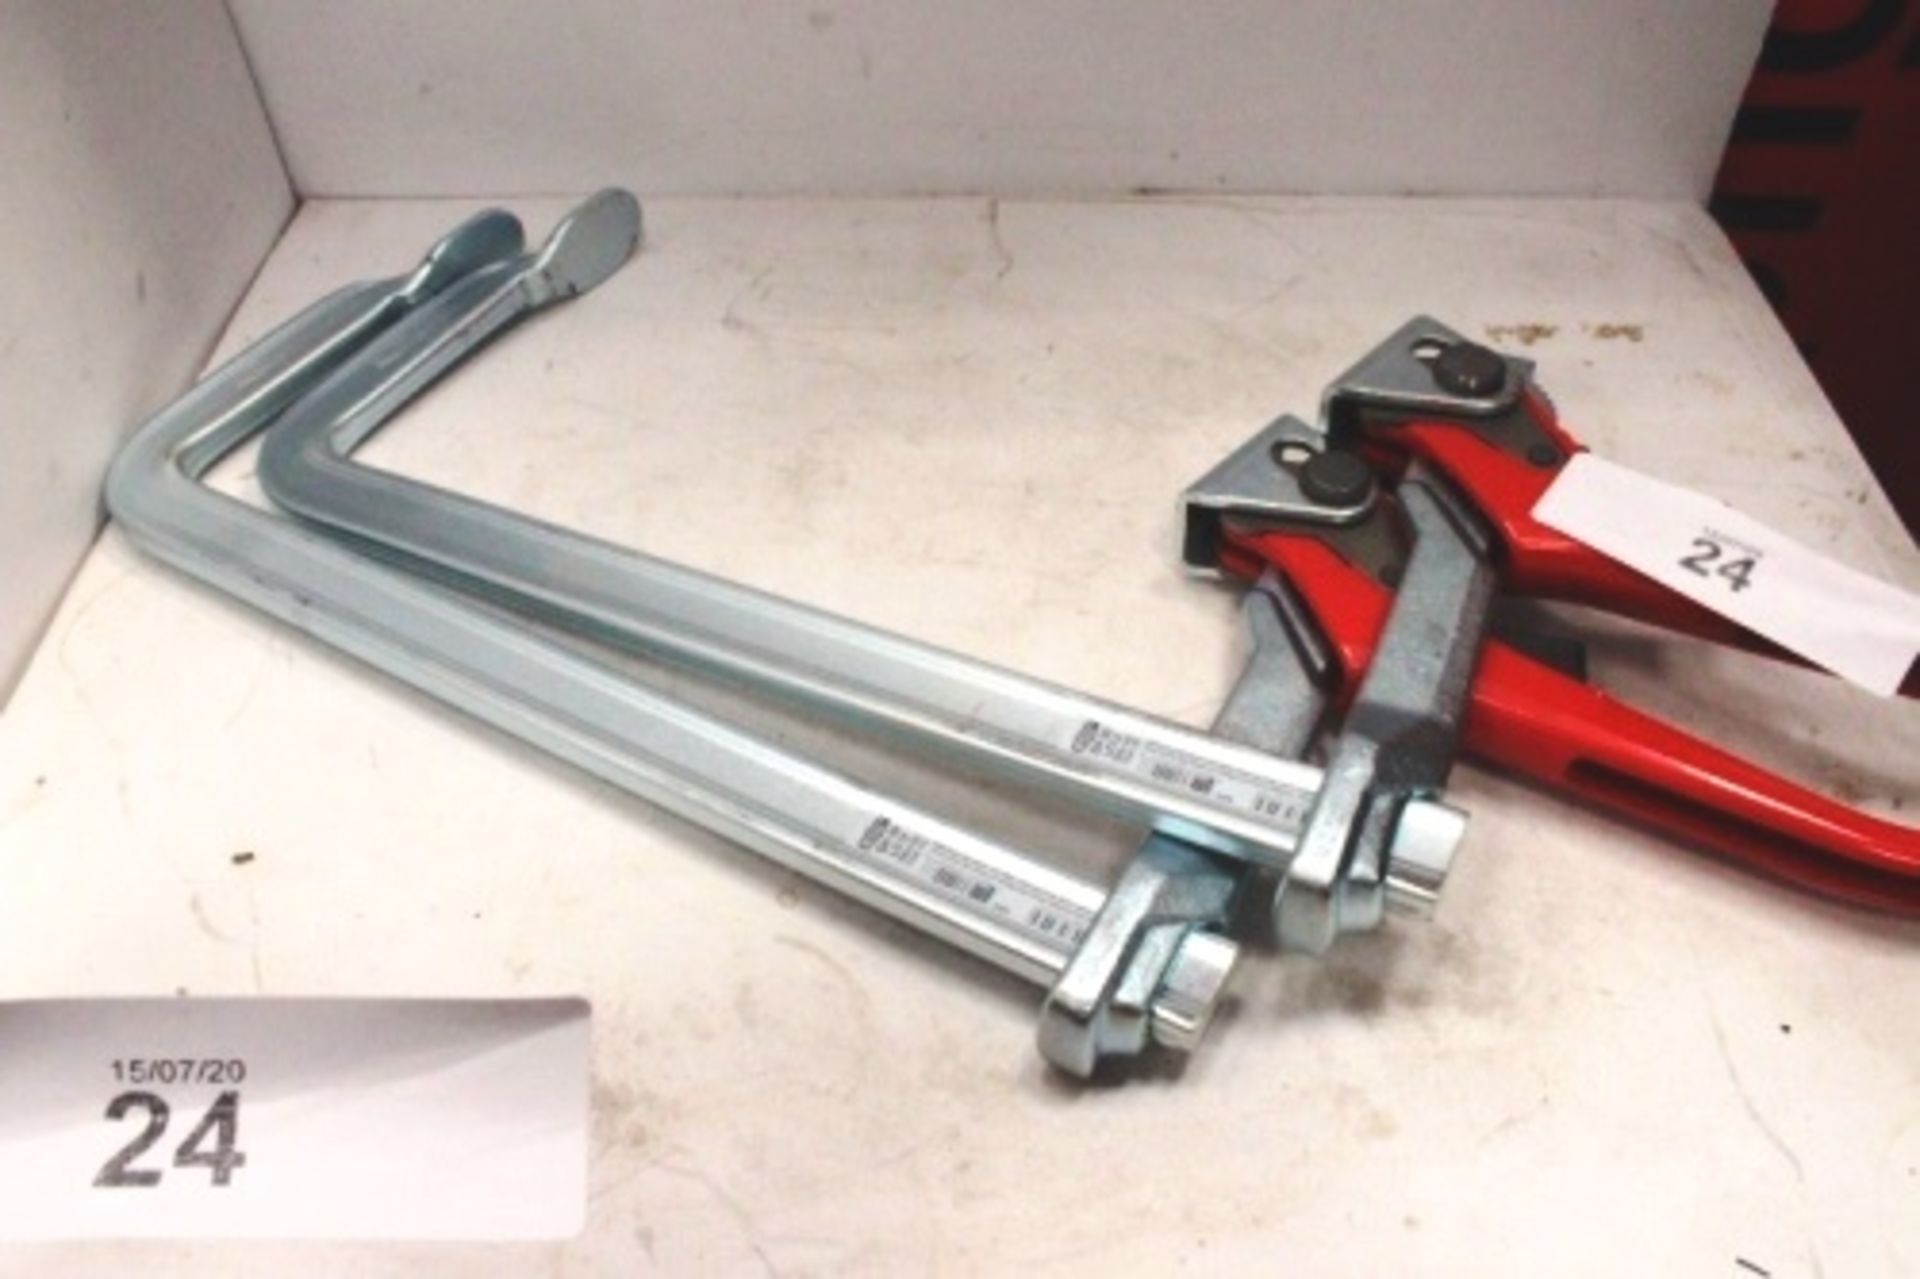 2 x Bessey GH30-LC12 lever G clamps, RRP £50.00 each - New (TC2)